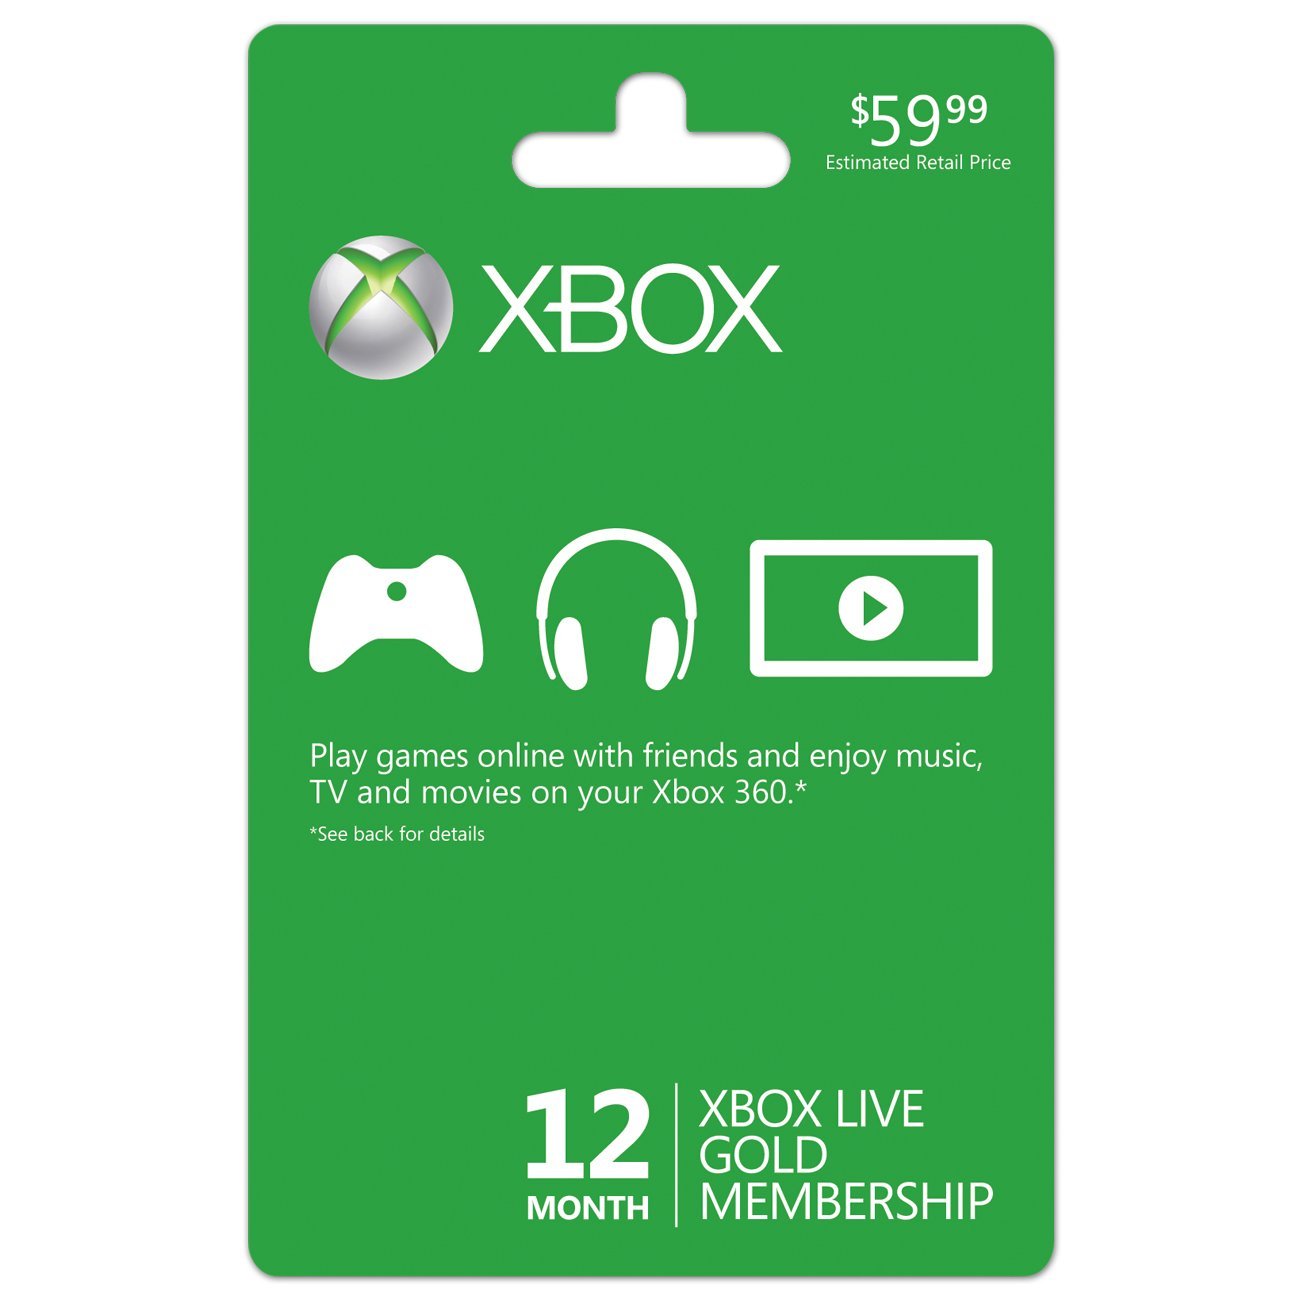 Xbox LIVE 12 Month Gold Membership $34.99+free shipping